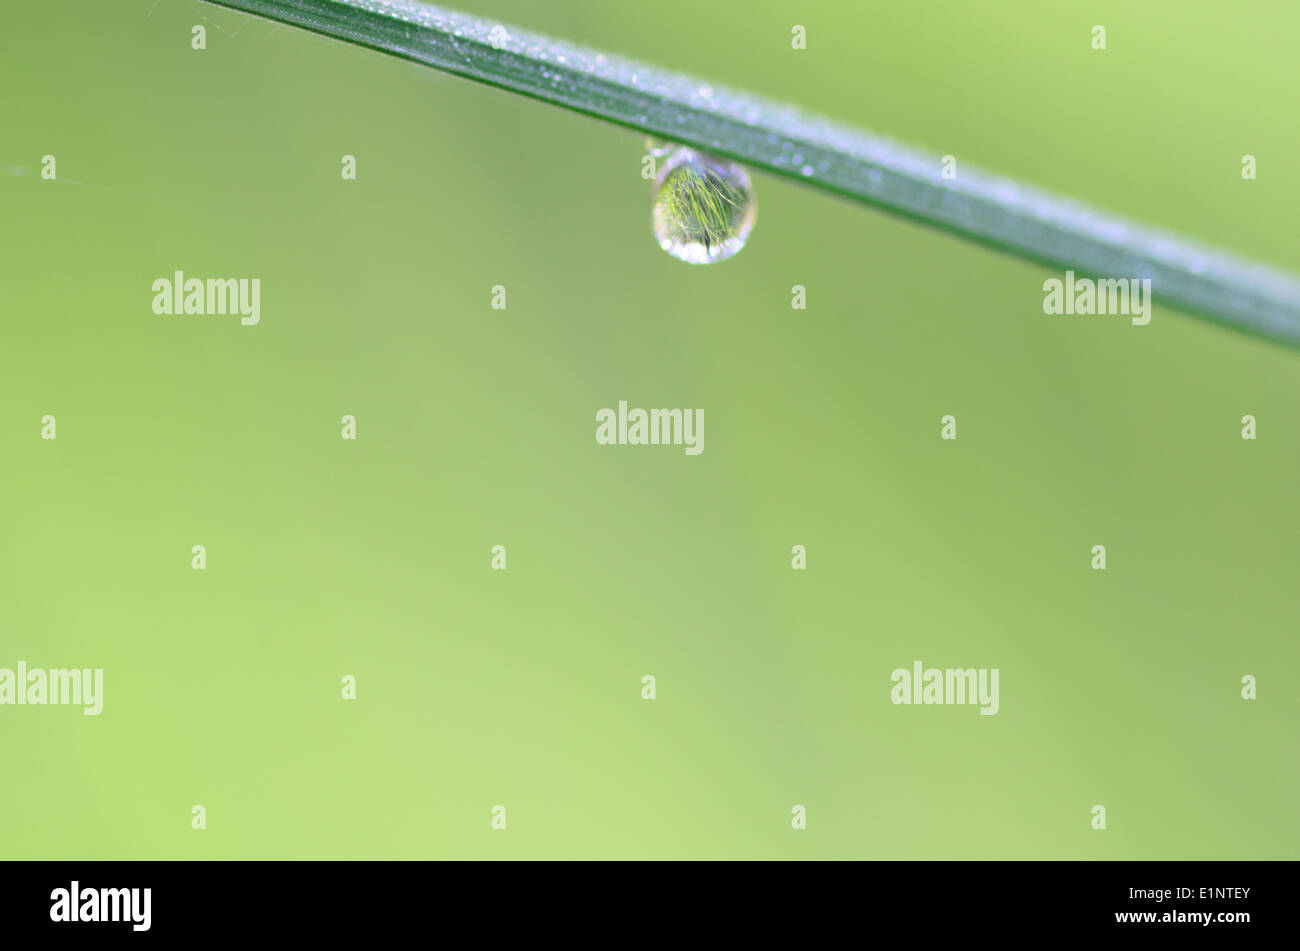 grass blade with waterdrop against green background Stock Photo